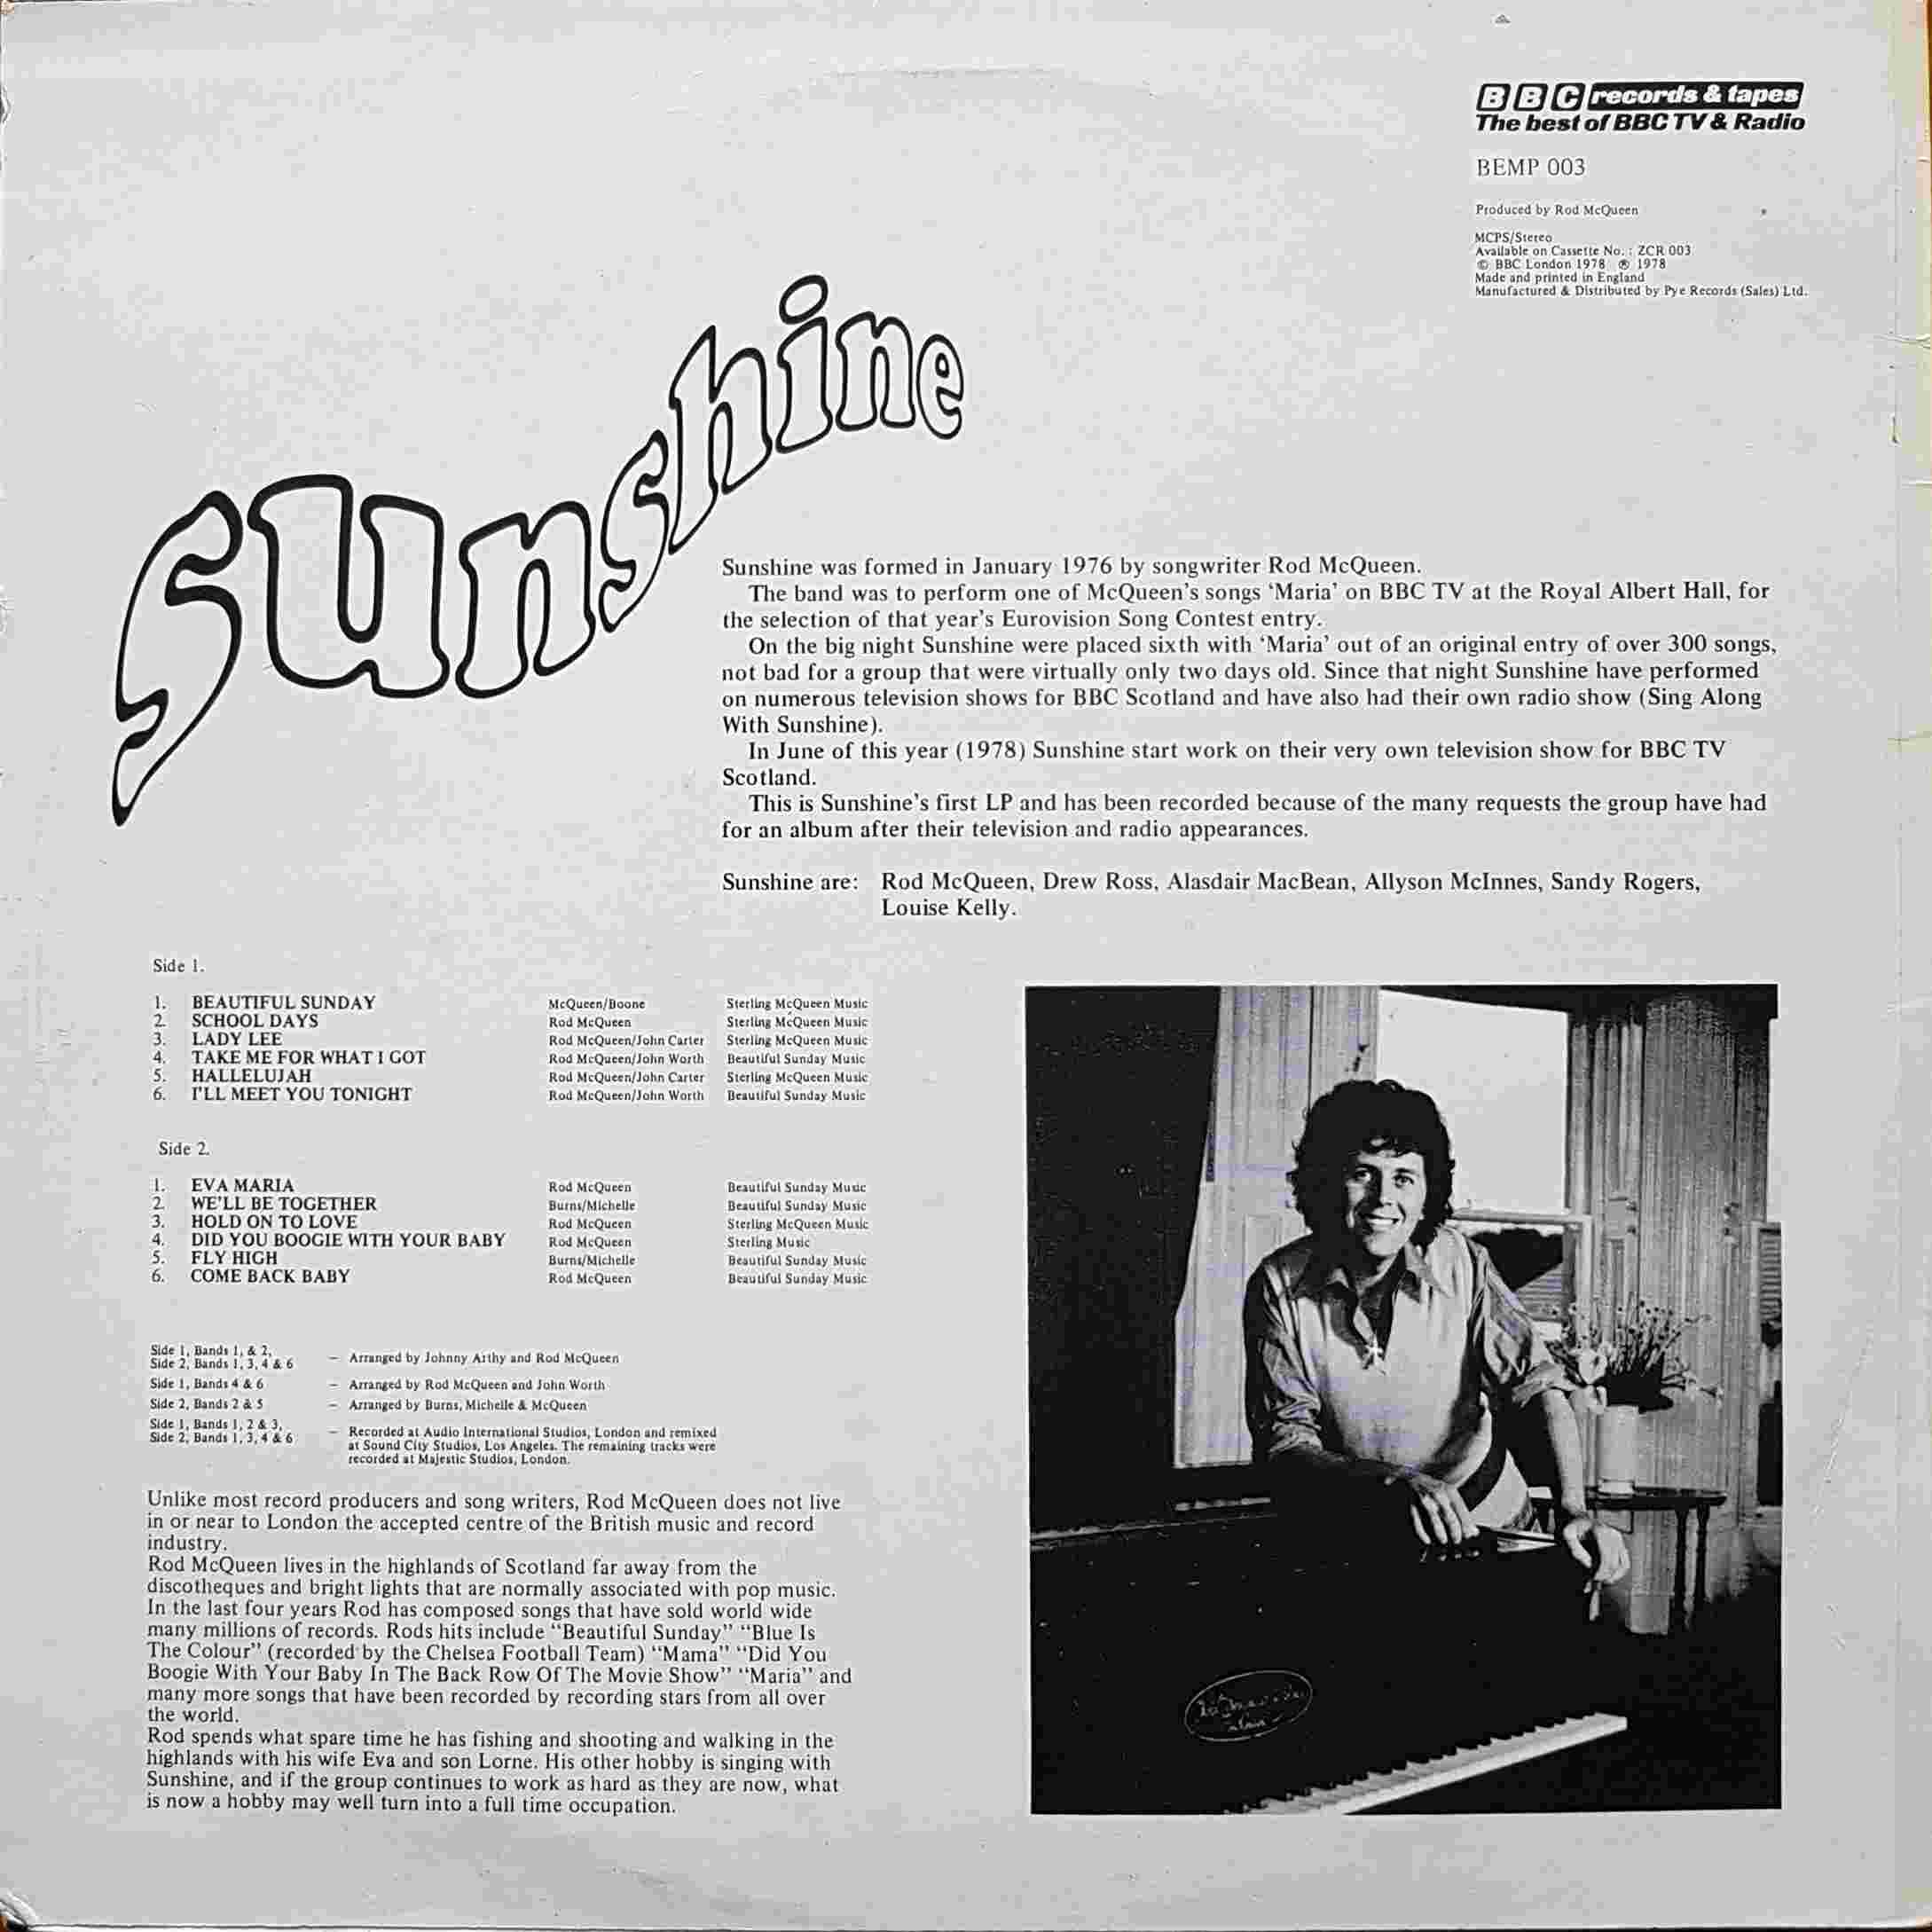 Picture of BEMP 003 Sunshine by artist Sunshine from the BBC records and Tapes library